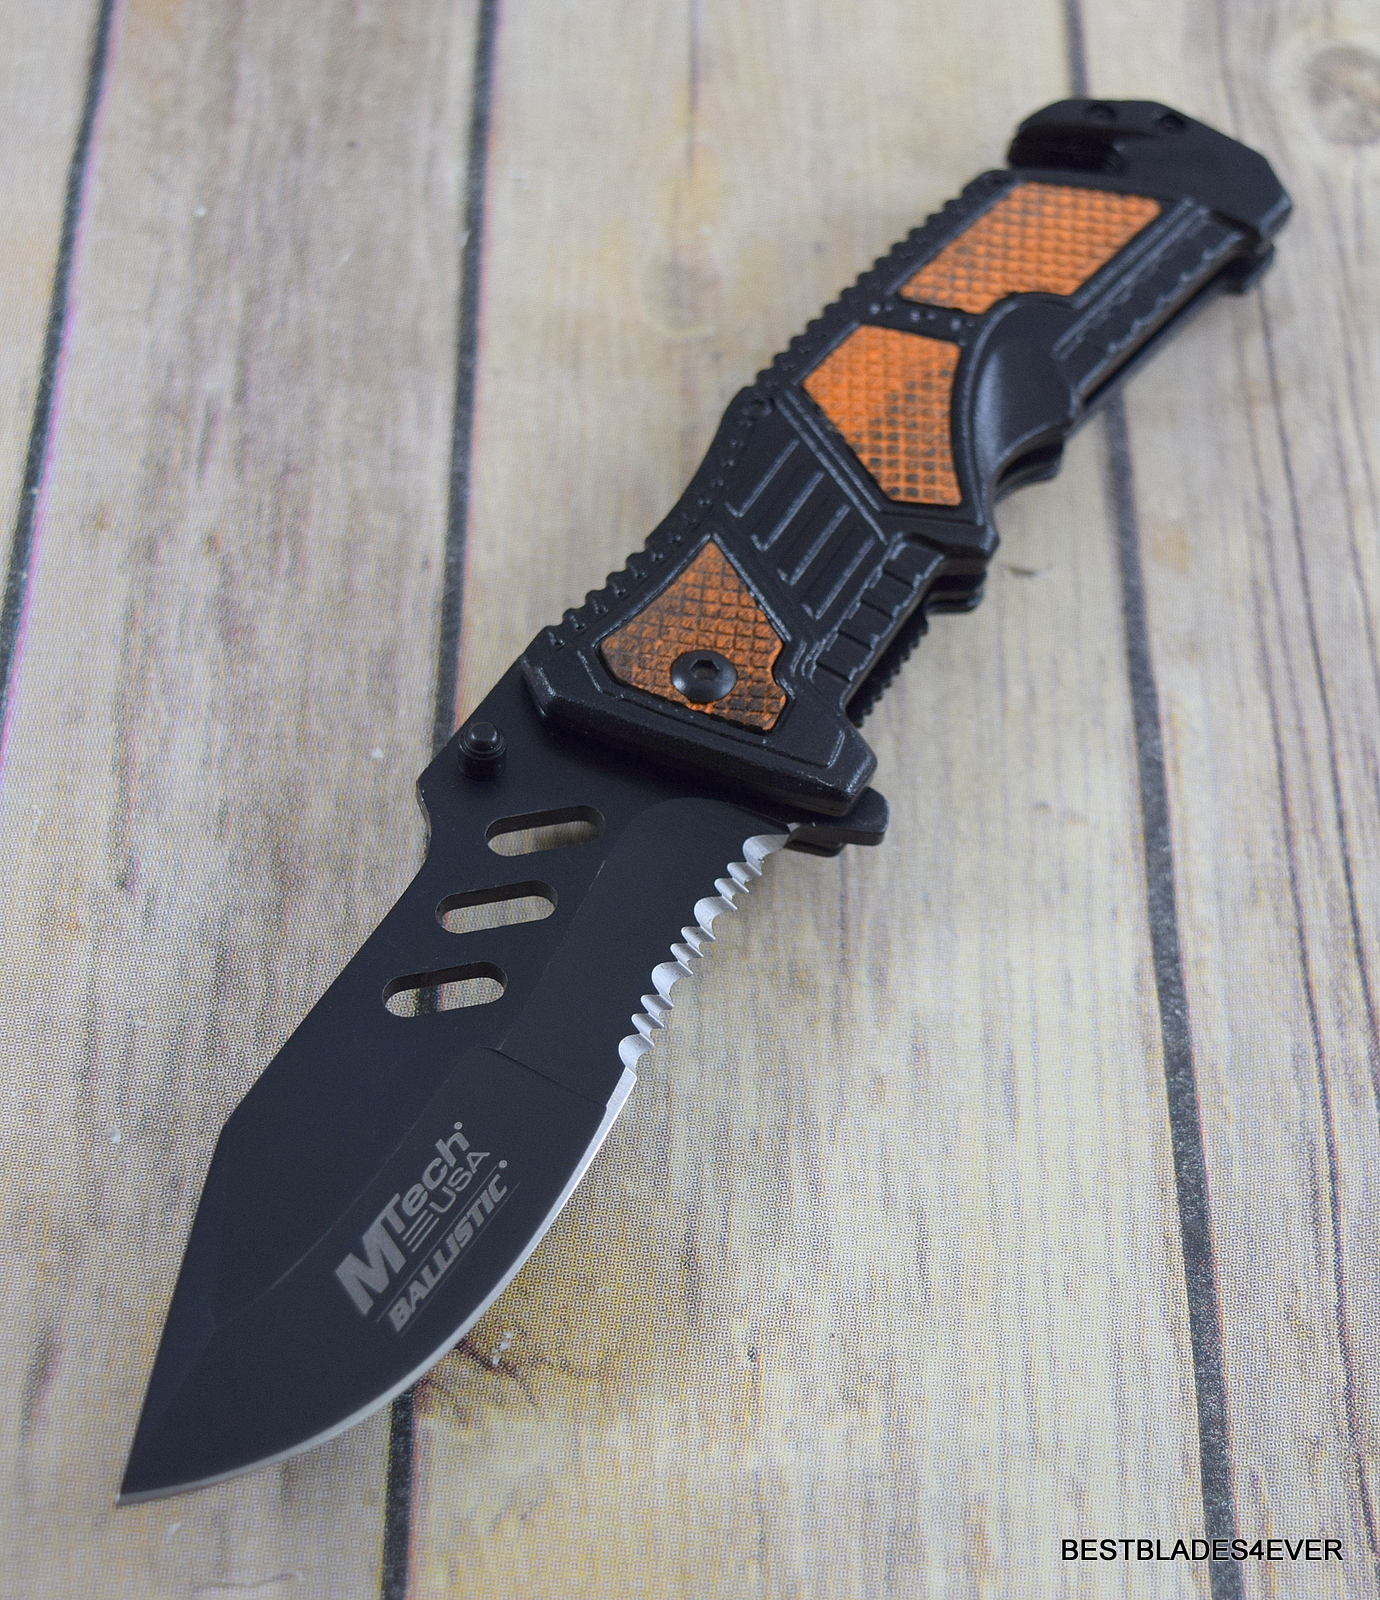 8.5" MTECH SPRING ASSISTED RESCUE POCKET KNIFE WITH POCKET CLIP